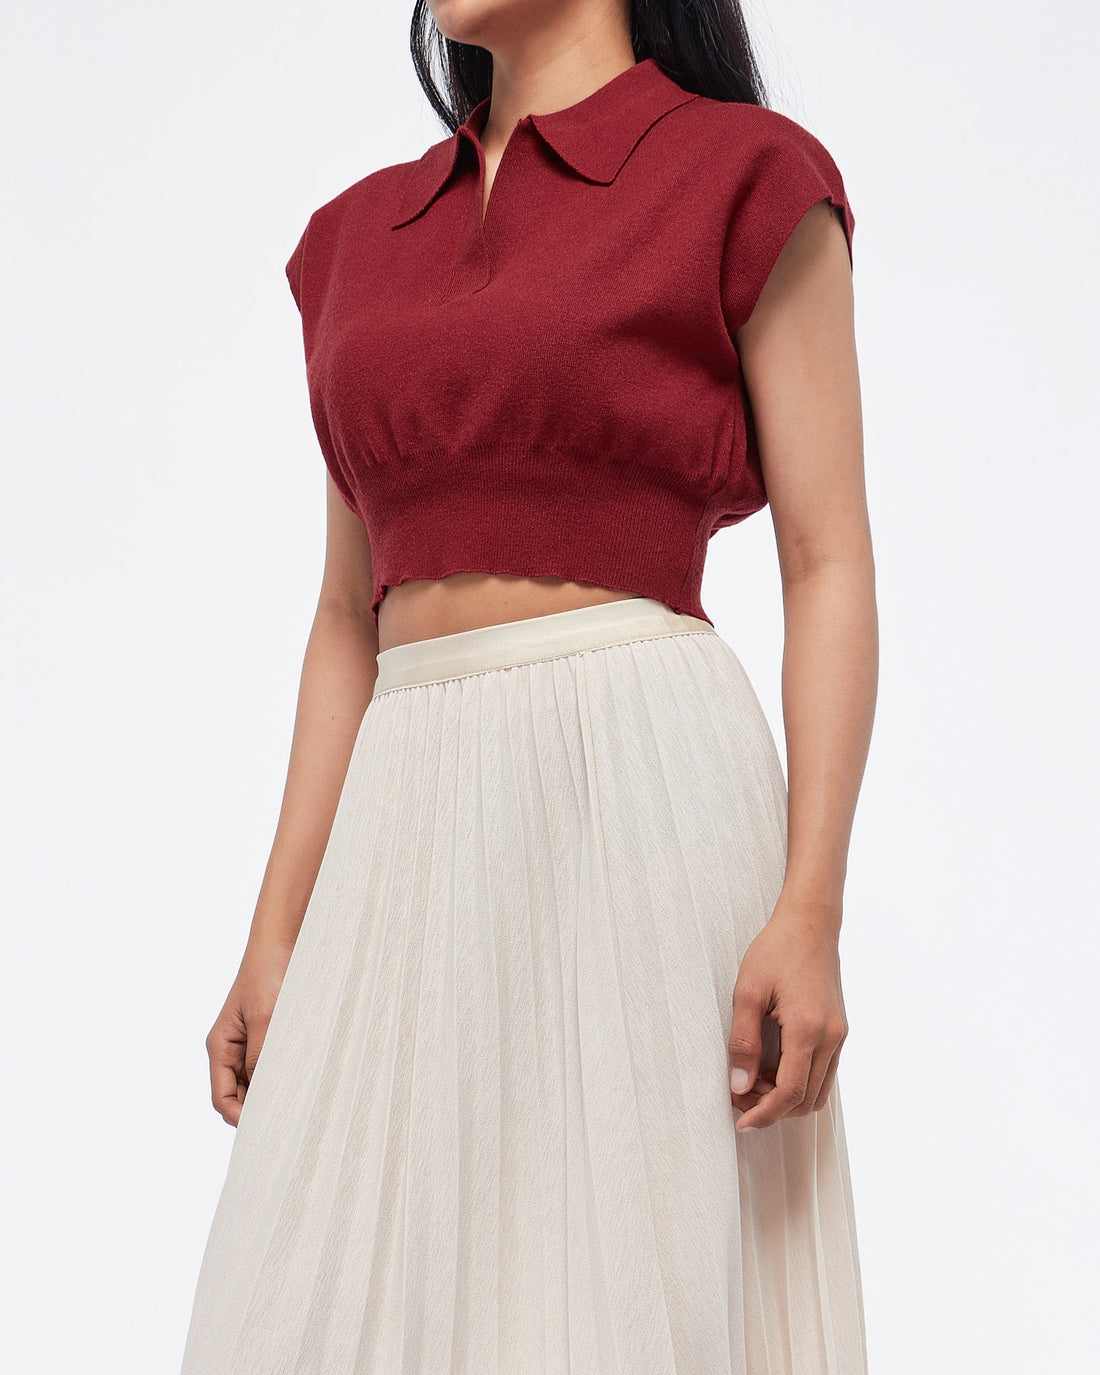 MOI OUTFIT-Soft Knit Polo Lady Crop Top 14.90